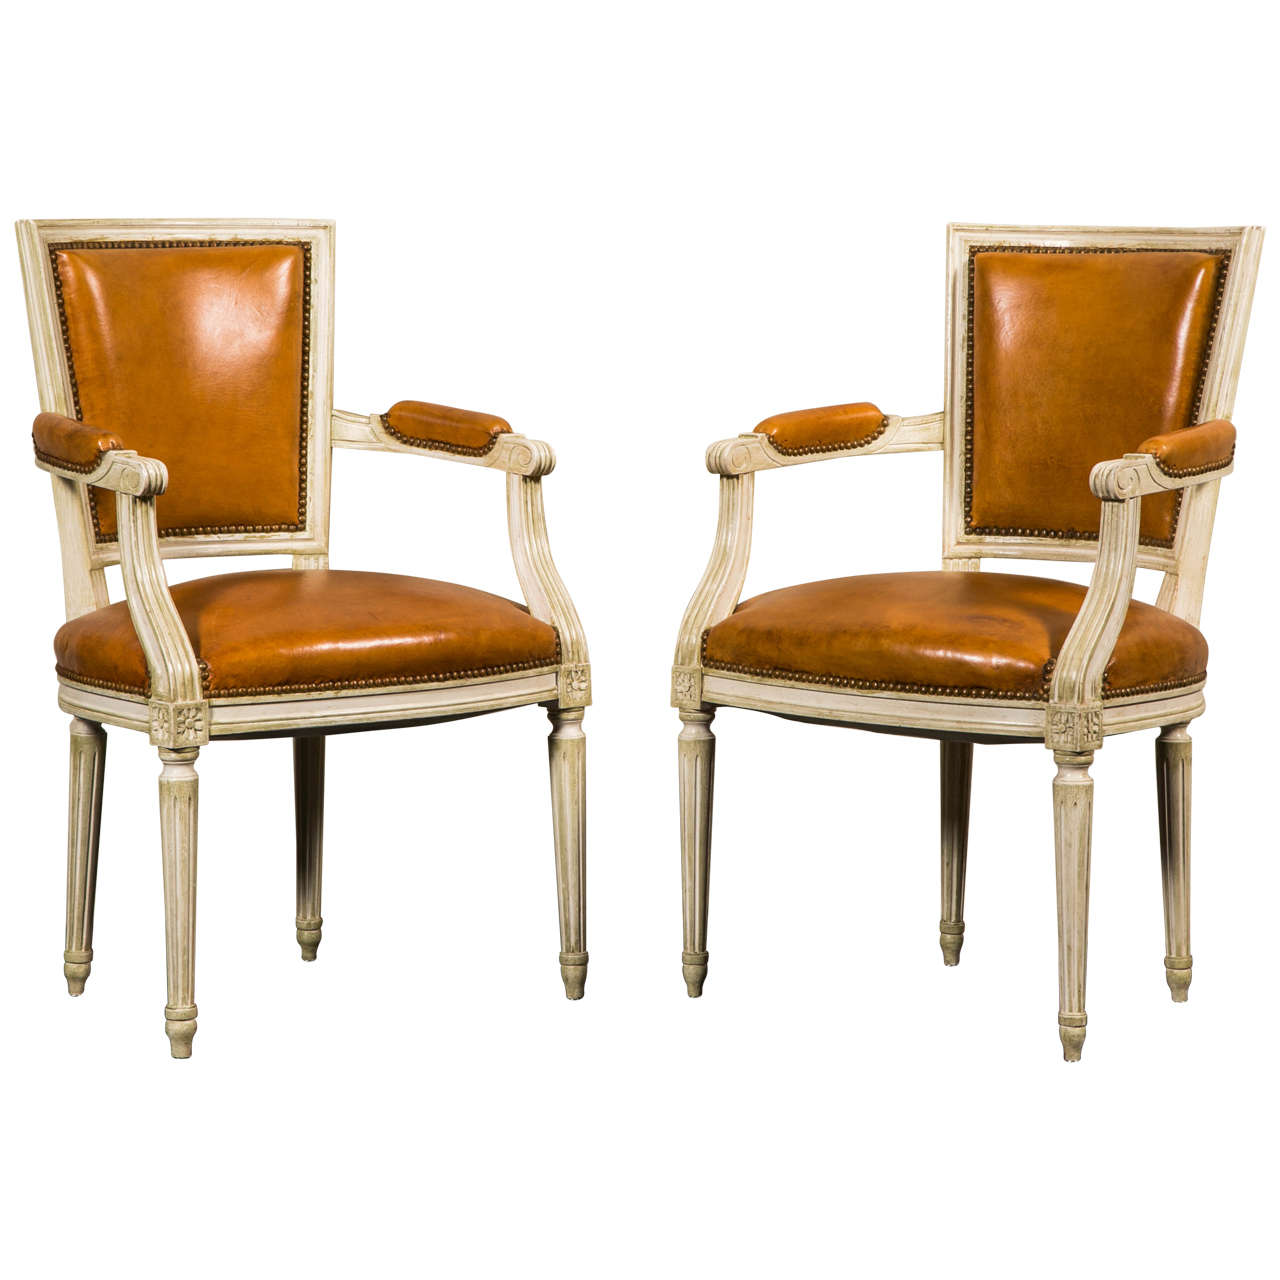 Pair of Cabriolets Armchairs in the Style of Louis XVI For Sale